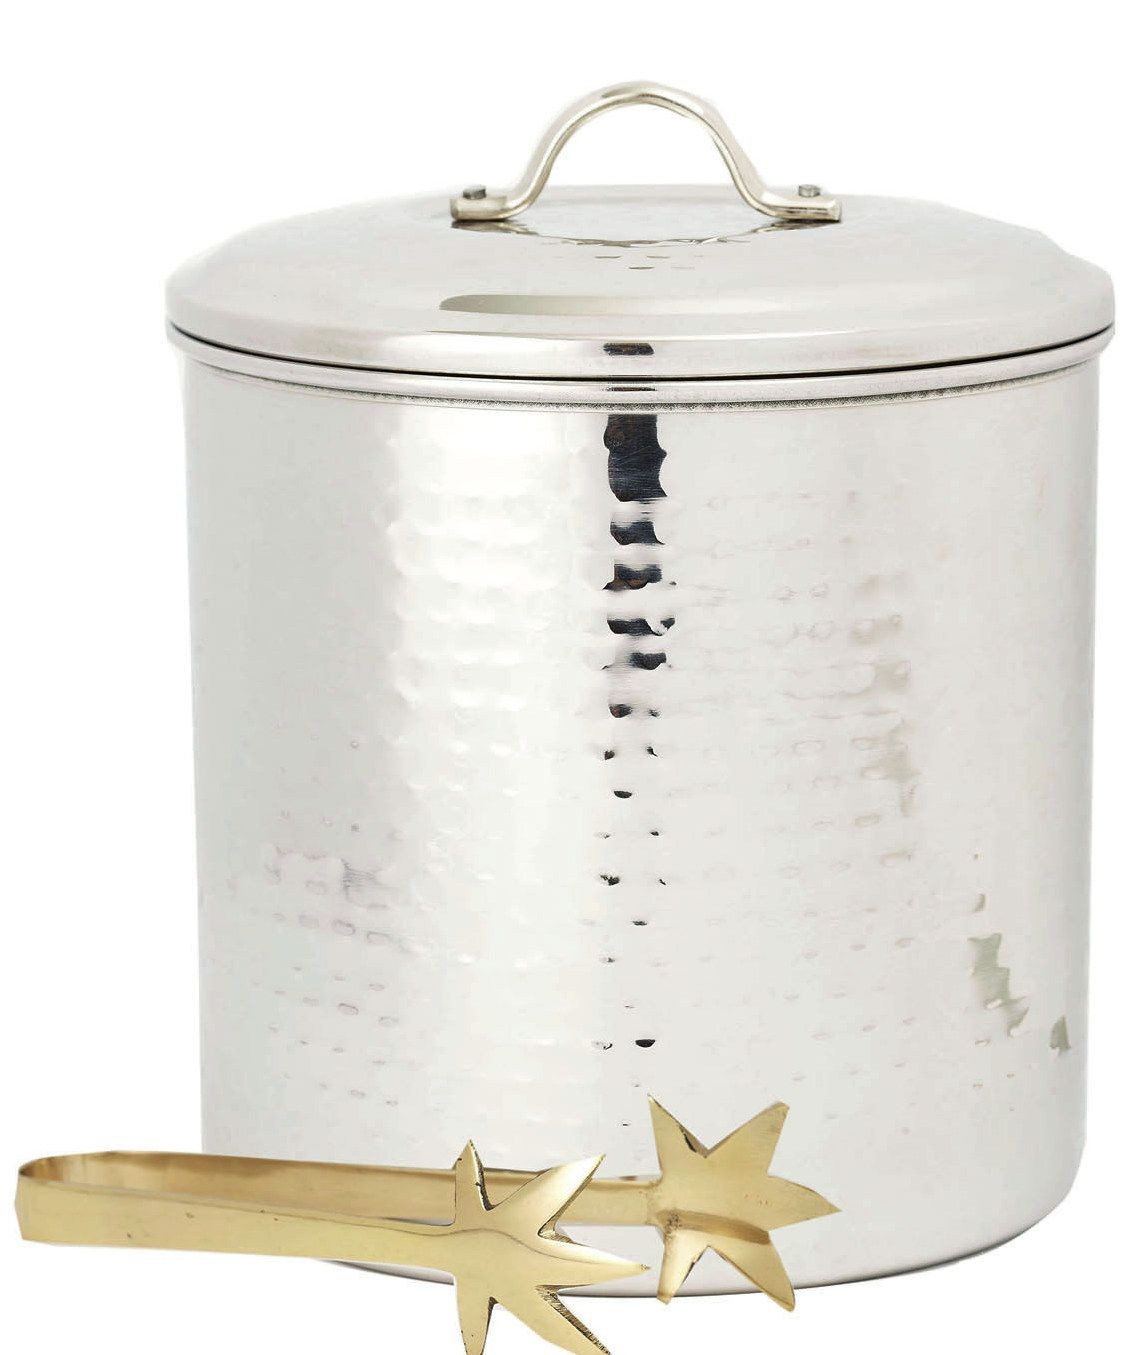 Pay a Old Dutch International Hammered Stainless Steel Ice Bucket with Brass Tongs, 3 Qt. that is exceptionally durable.